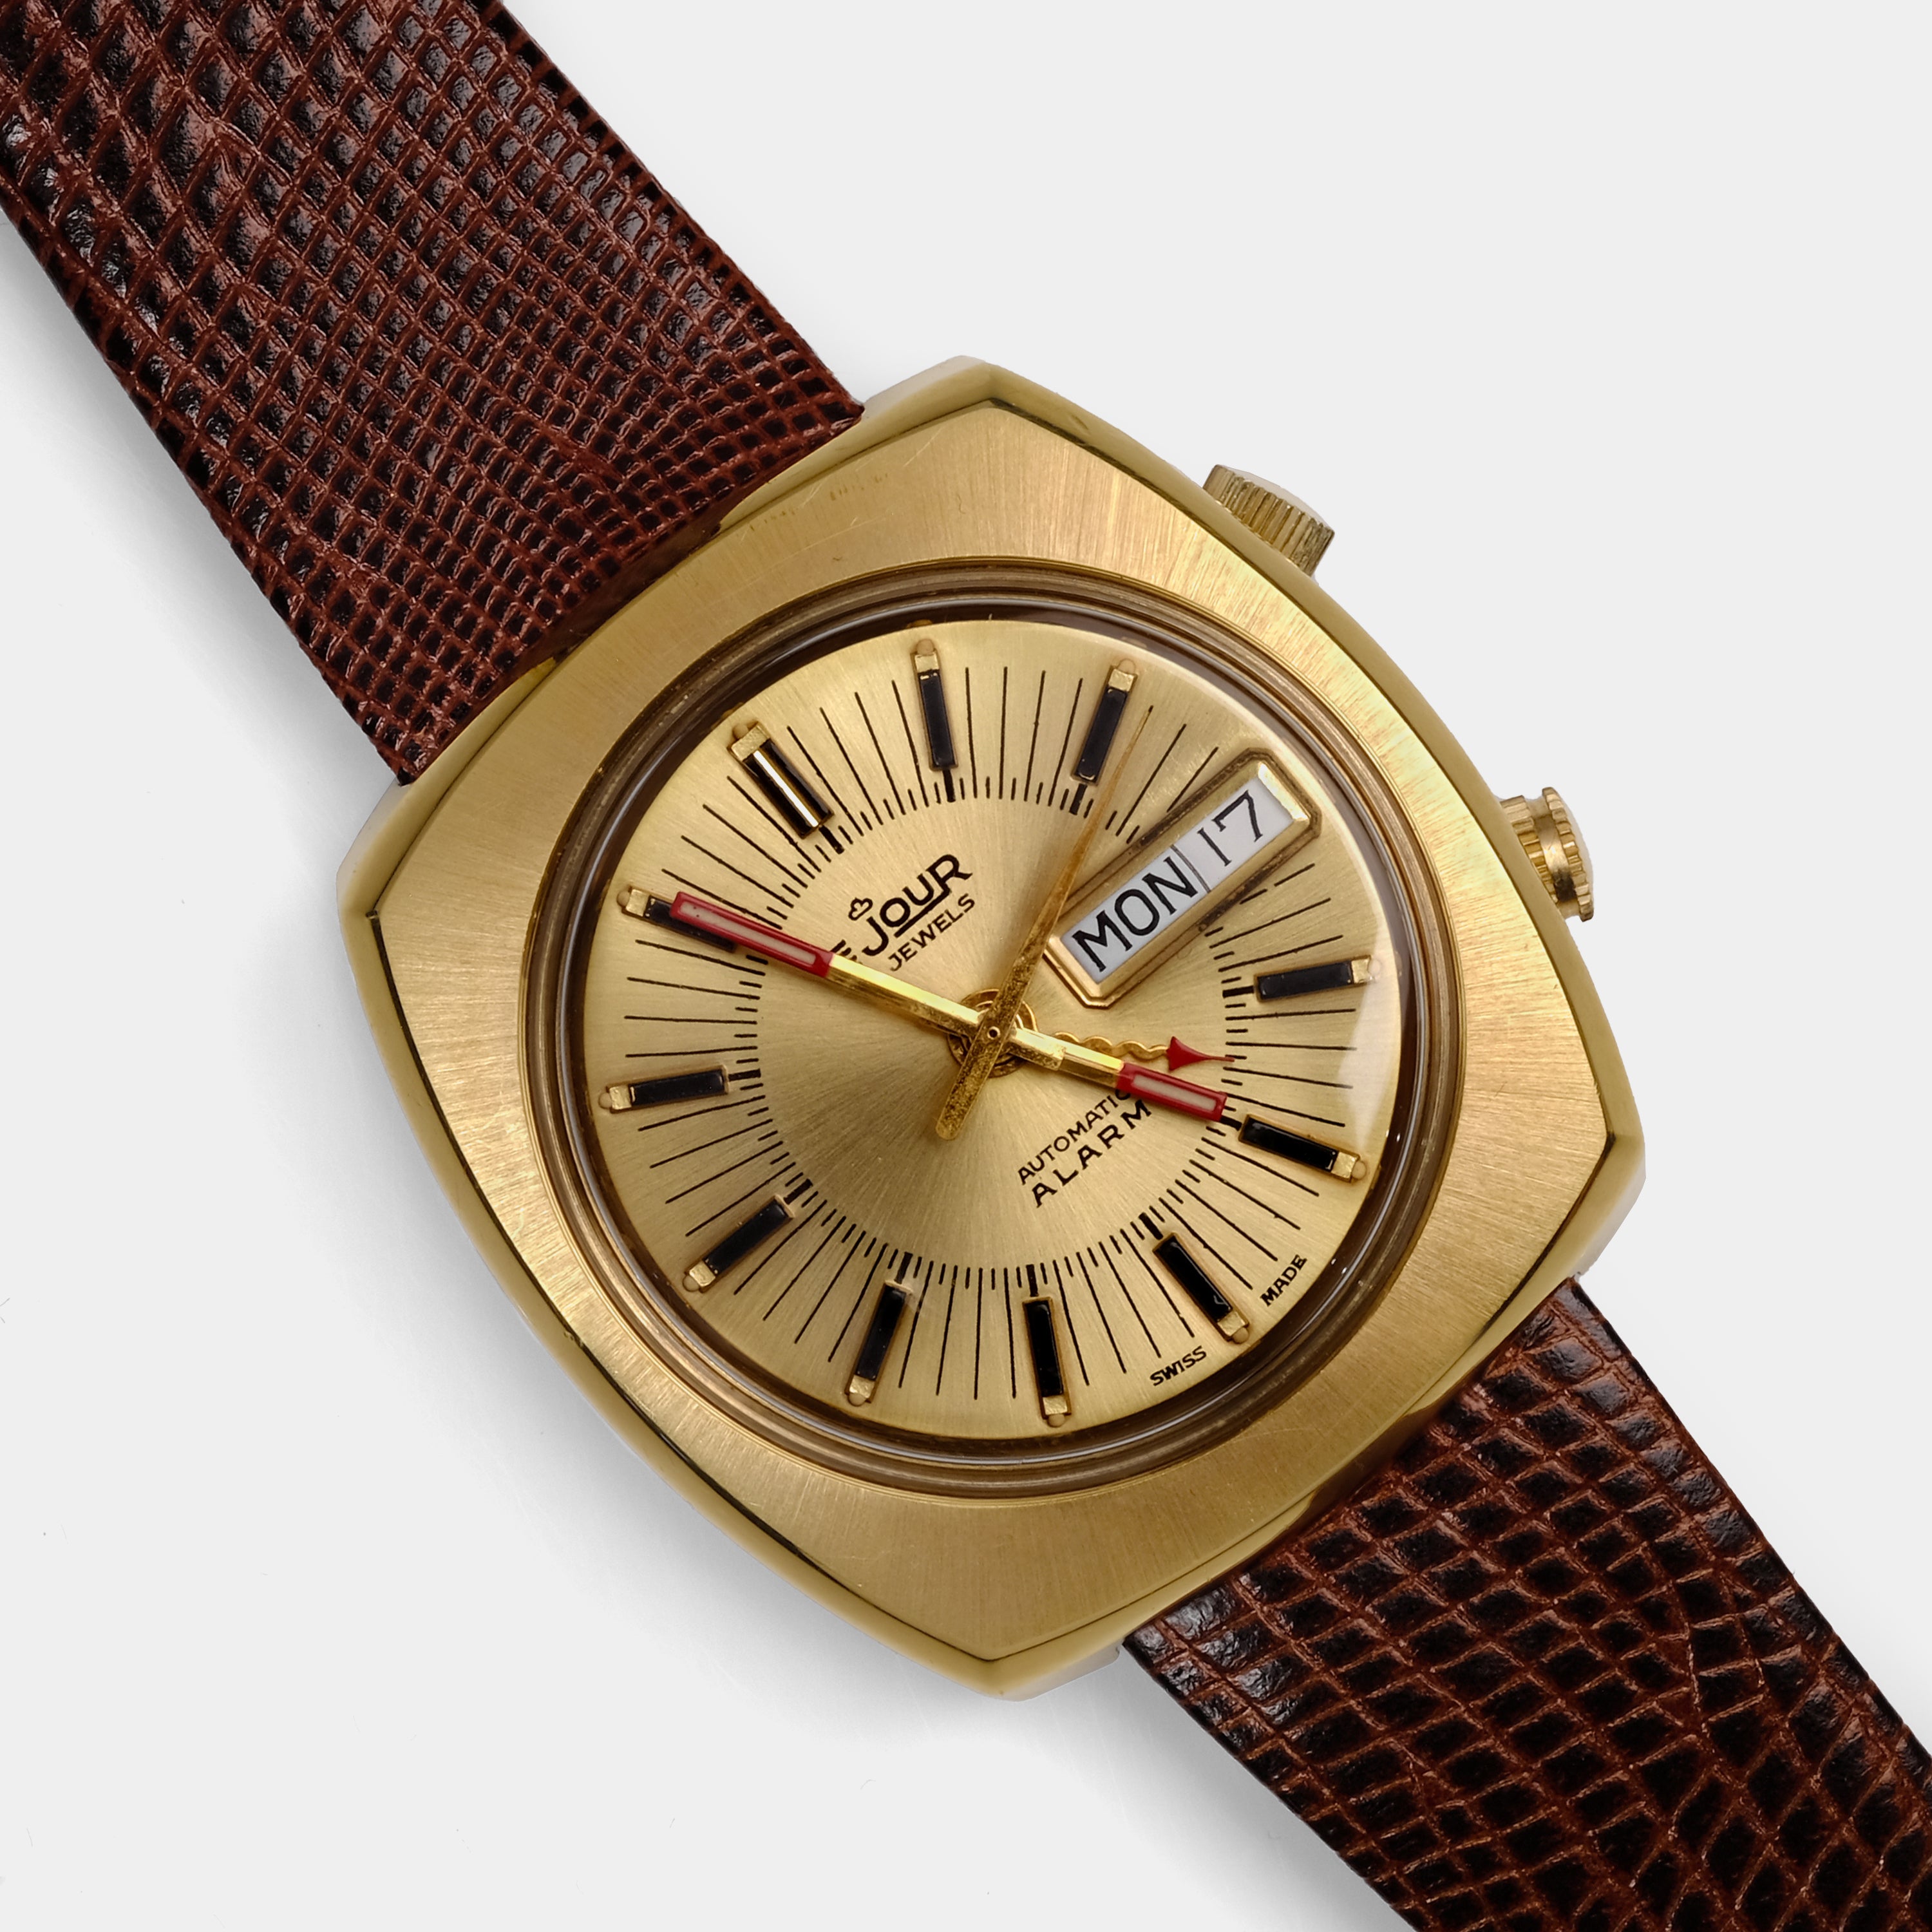 LeJour Day-Date Automatic Alarm Gold Dial Circa 1970s Wristwatch